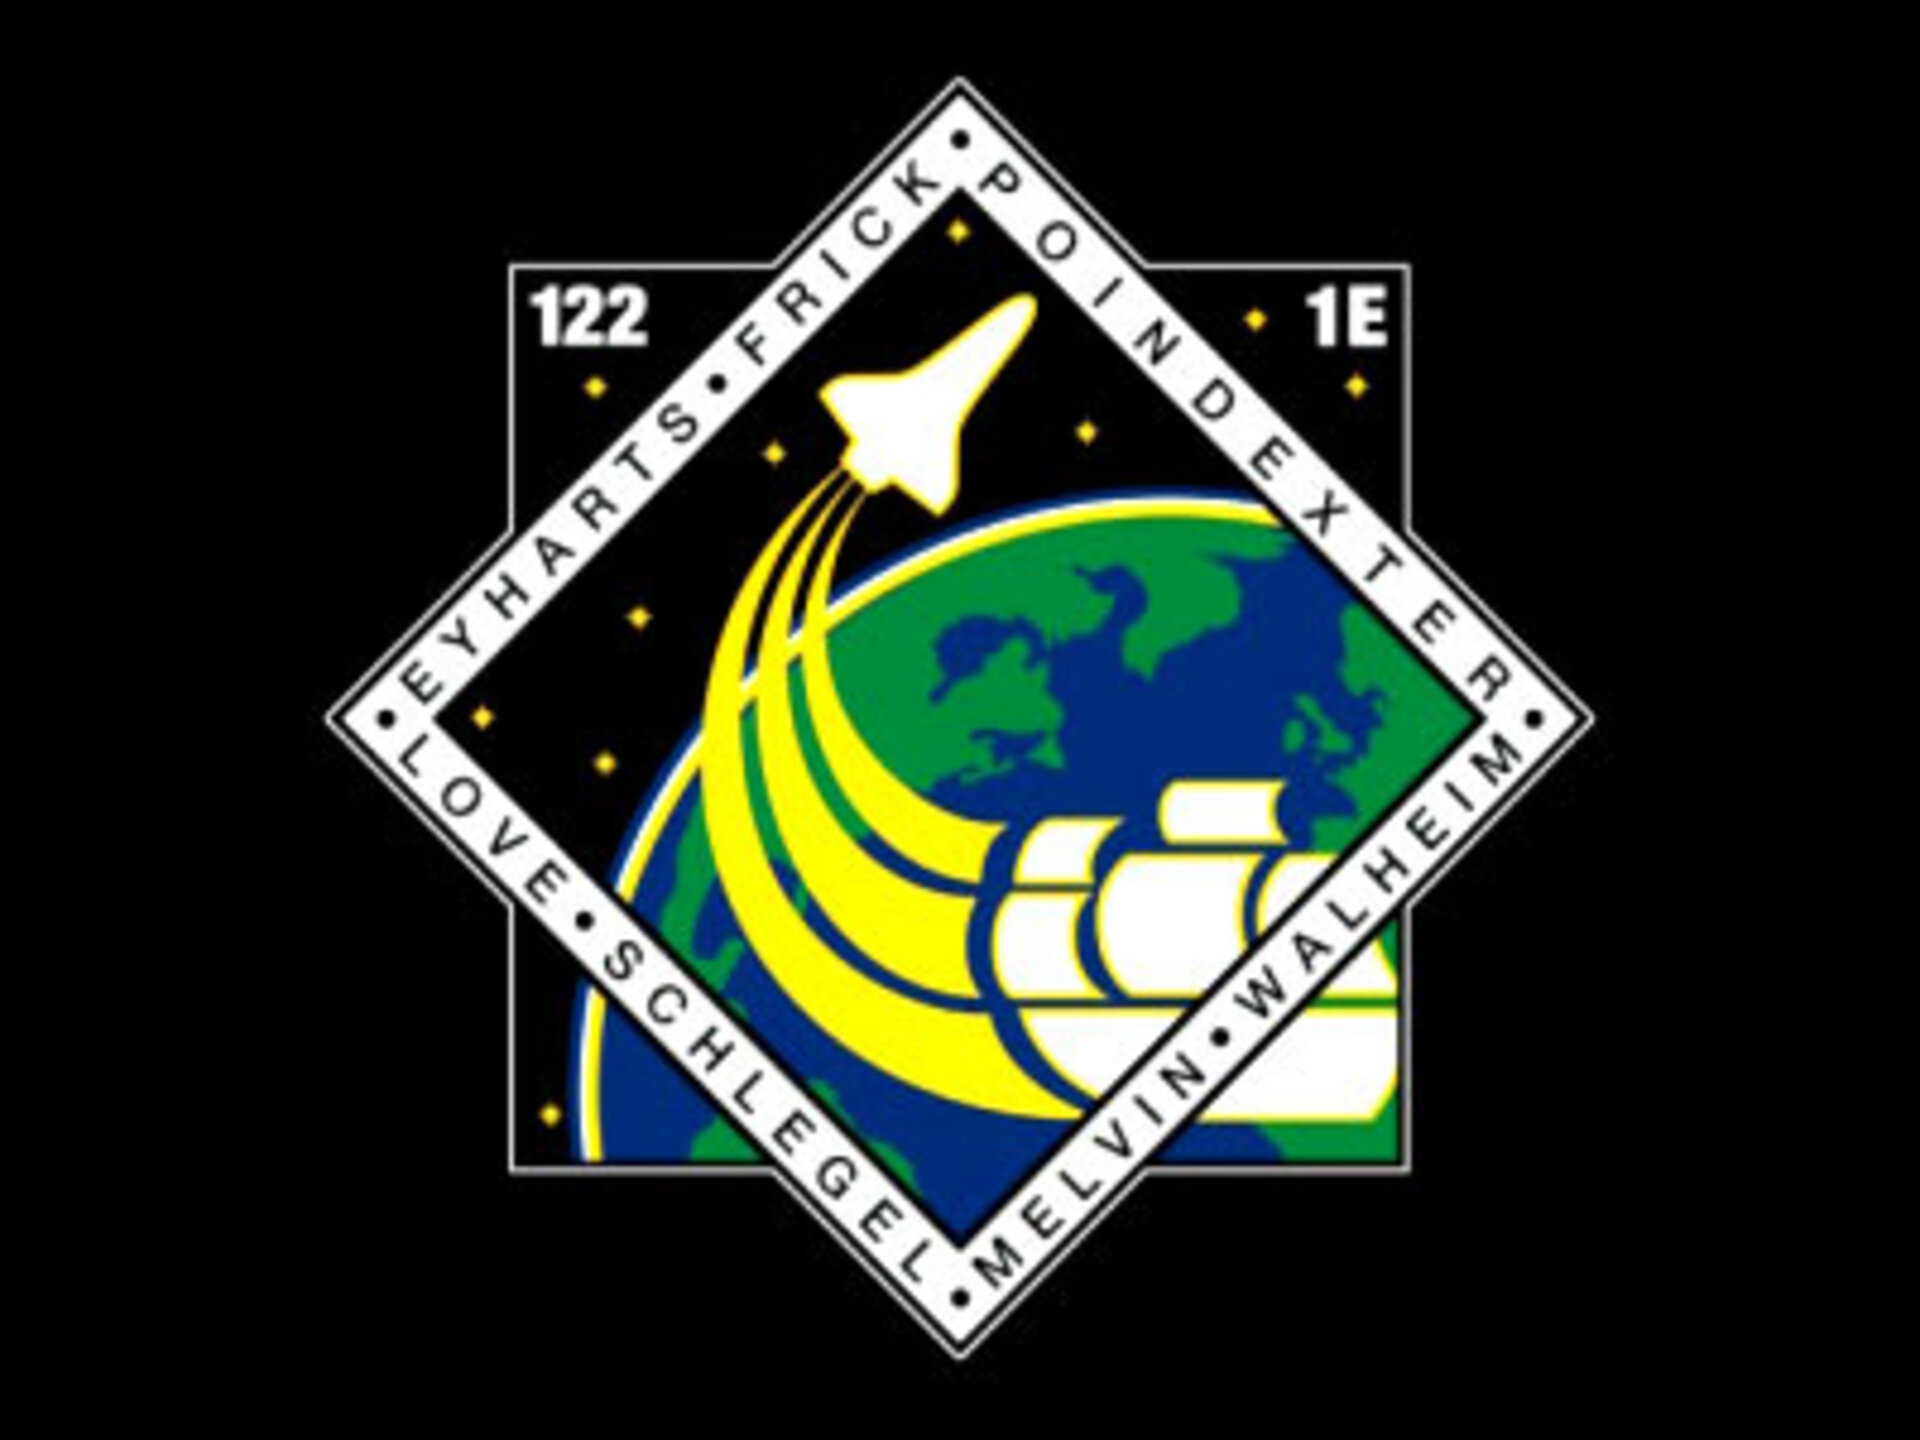 Unofficial summary of the STS-122 mission to deliver and install the European Columbus laboratory